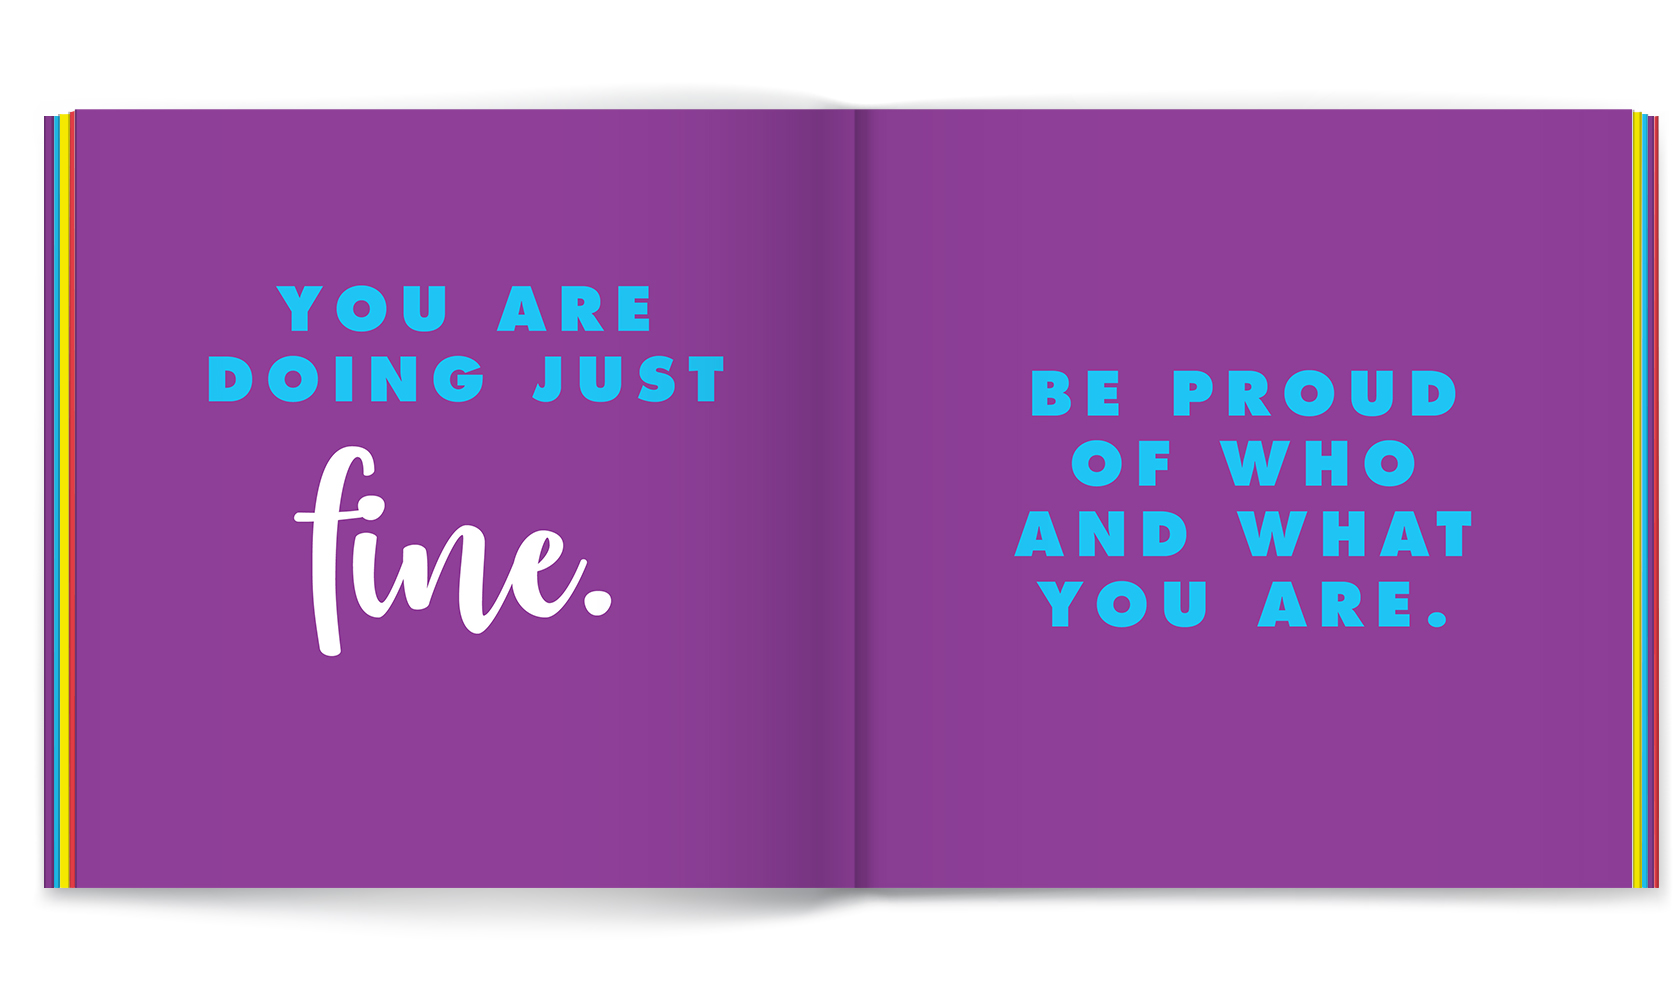 Book quote: You are doing just fine. Be proud of who and what you are.